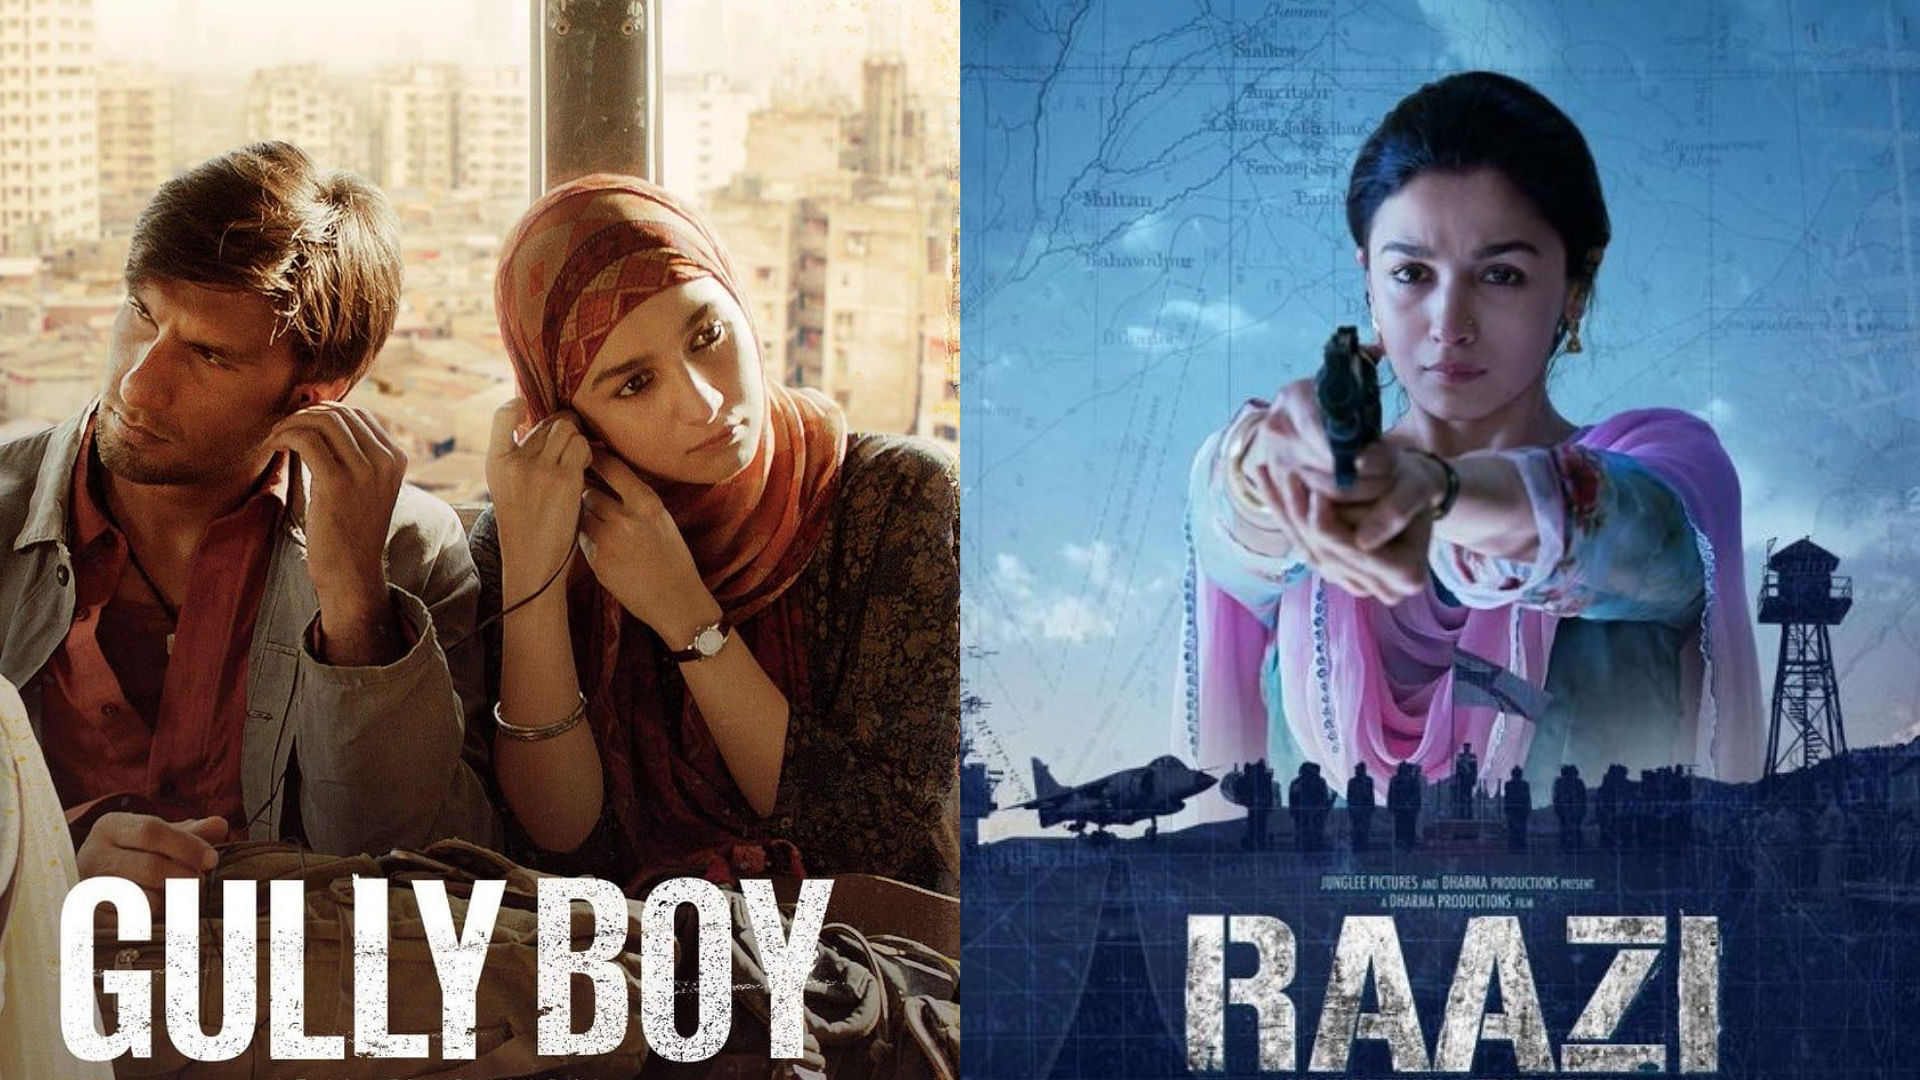 Gully Boy beats the lifetime business of Alia Bhatt-starrer ‘Raazi’, which was slated at Rs 123.84 crore.